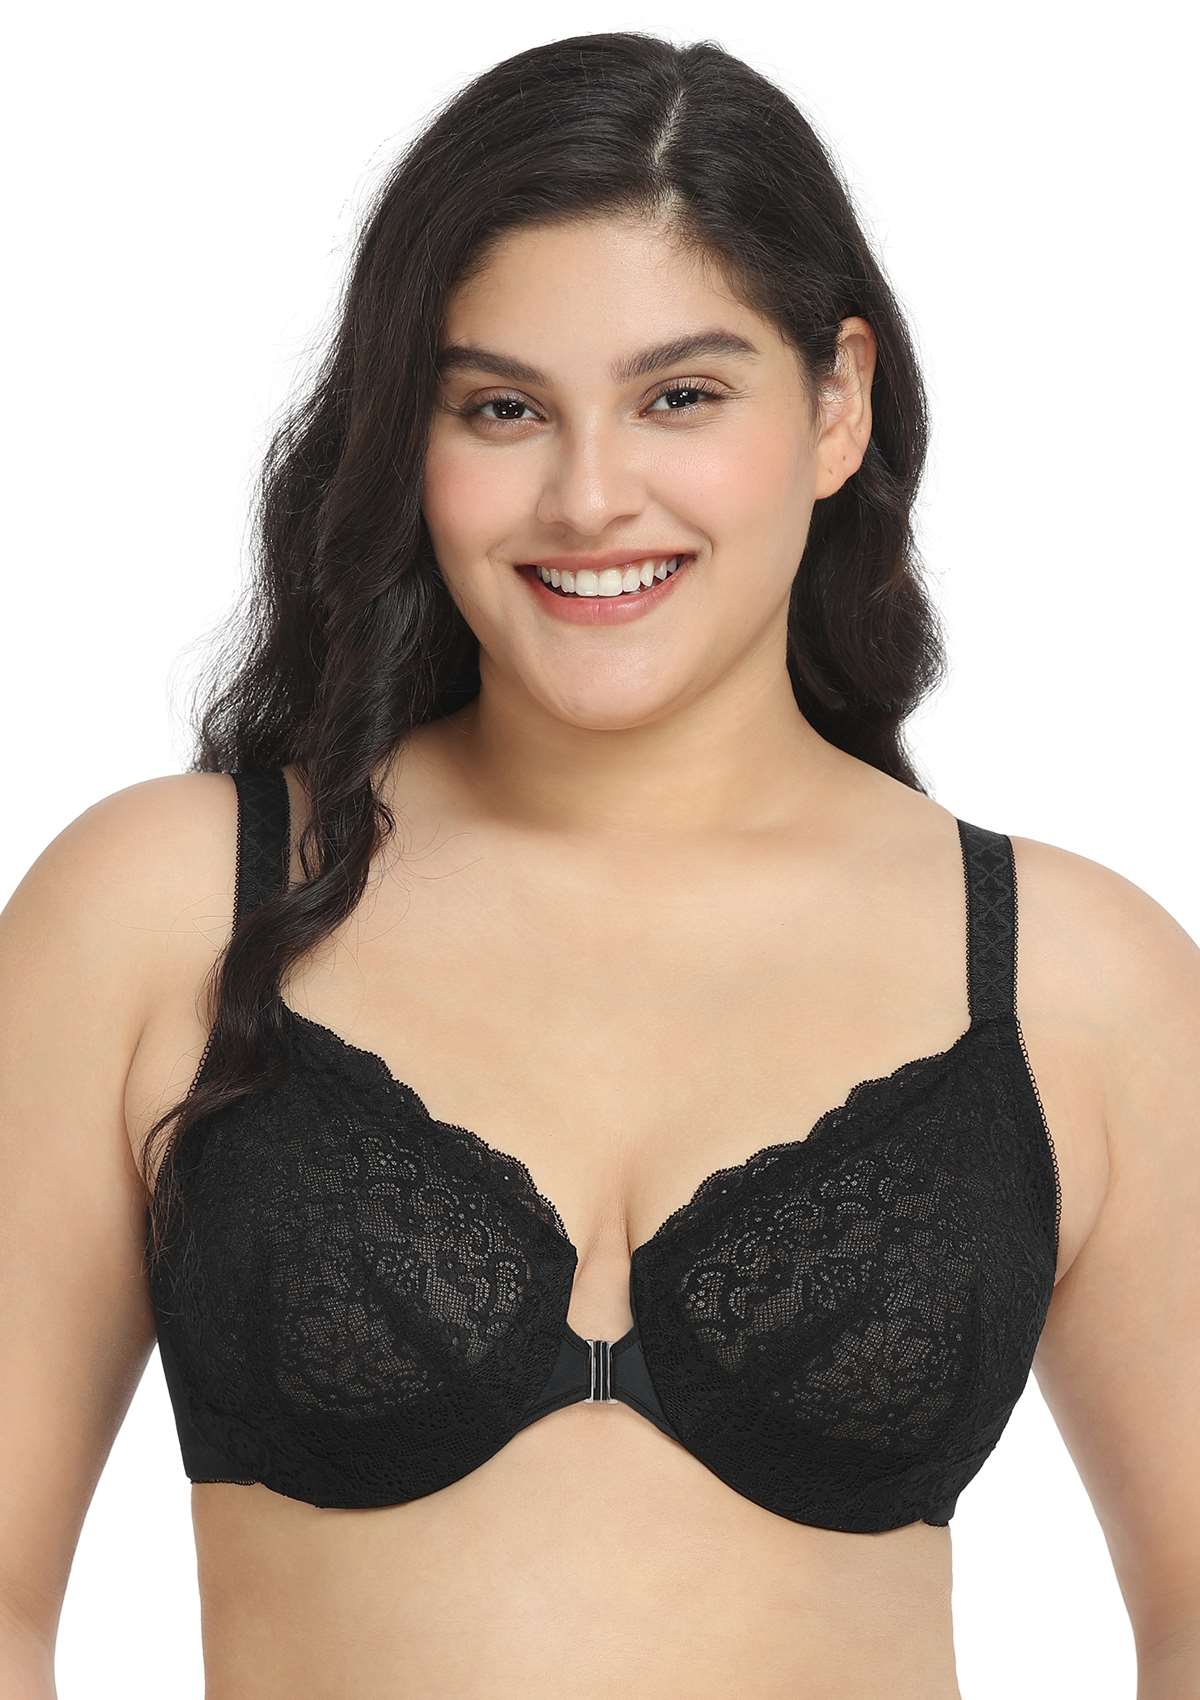 HSIA Nymphaea Front-Close Unlined Retro Floral Lace Back Smoothing Bra - Black / 40 / D